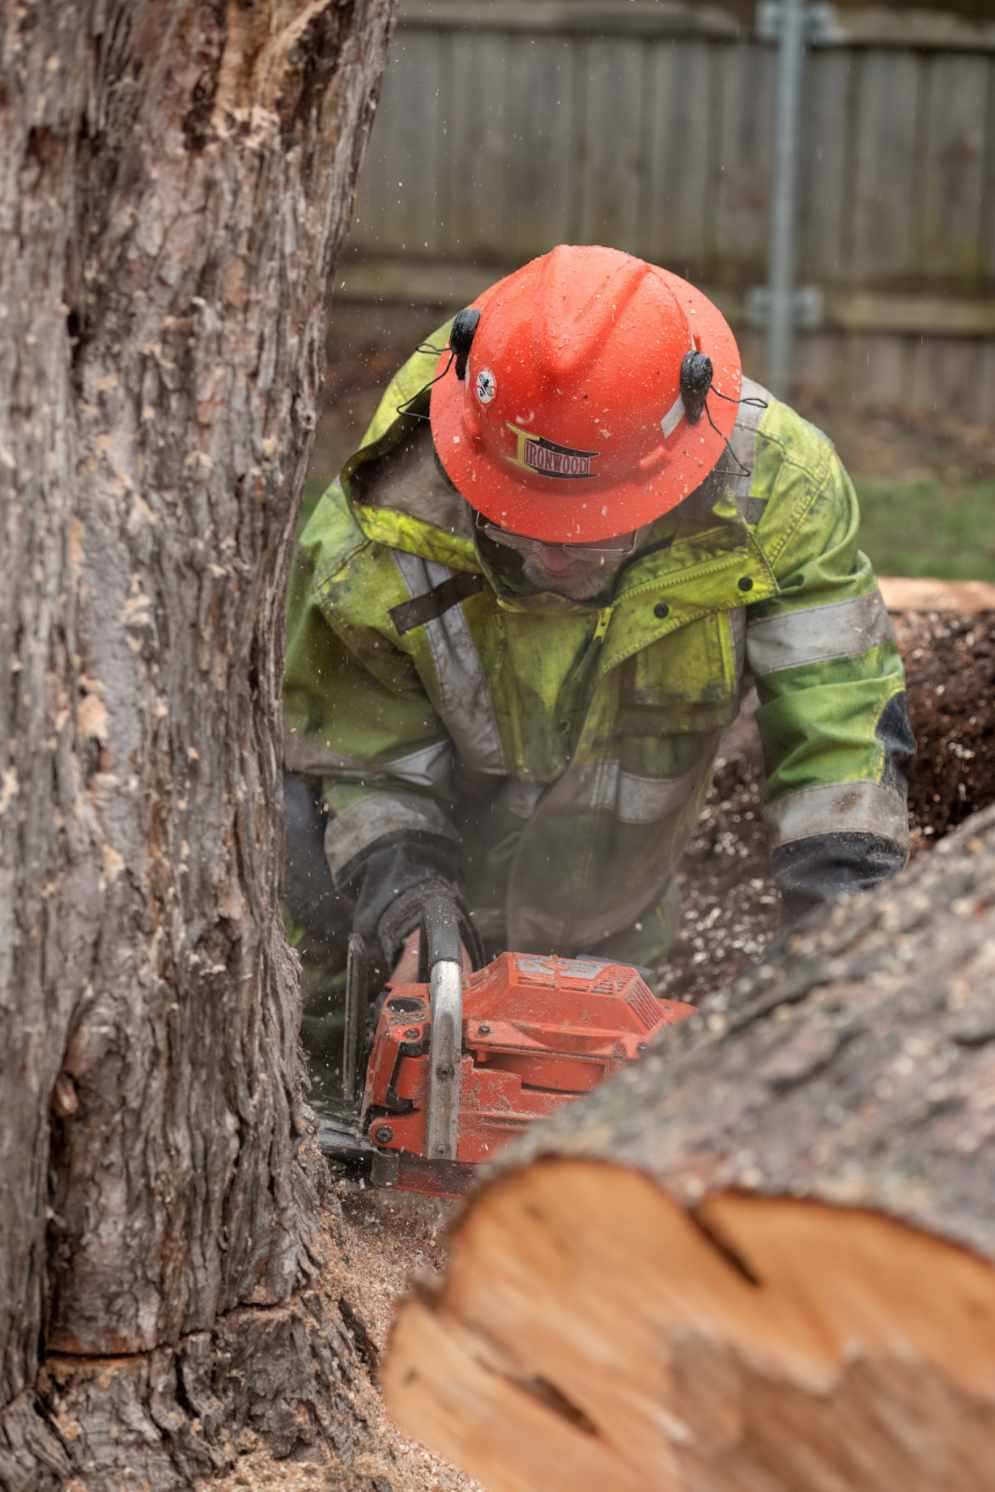 Expert Tree Trimming Rochester, Rochester Tree Planting Services, Hazardous Tree Assessment Rochester, Safe Tree Removal Rochester NY, Emergency Tree Cutting Rochester, Tree Disease Treatment Rochester